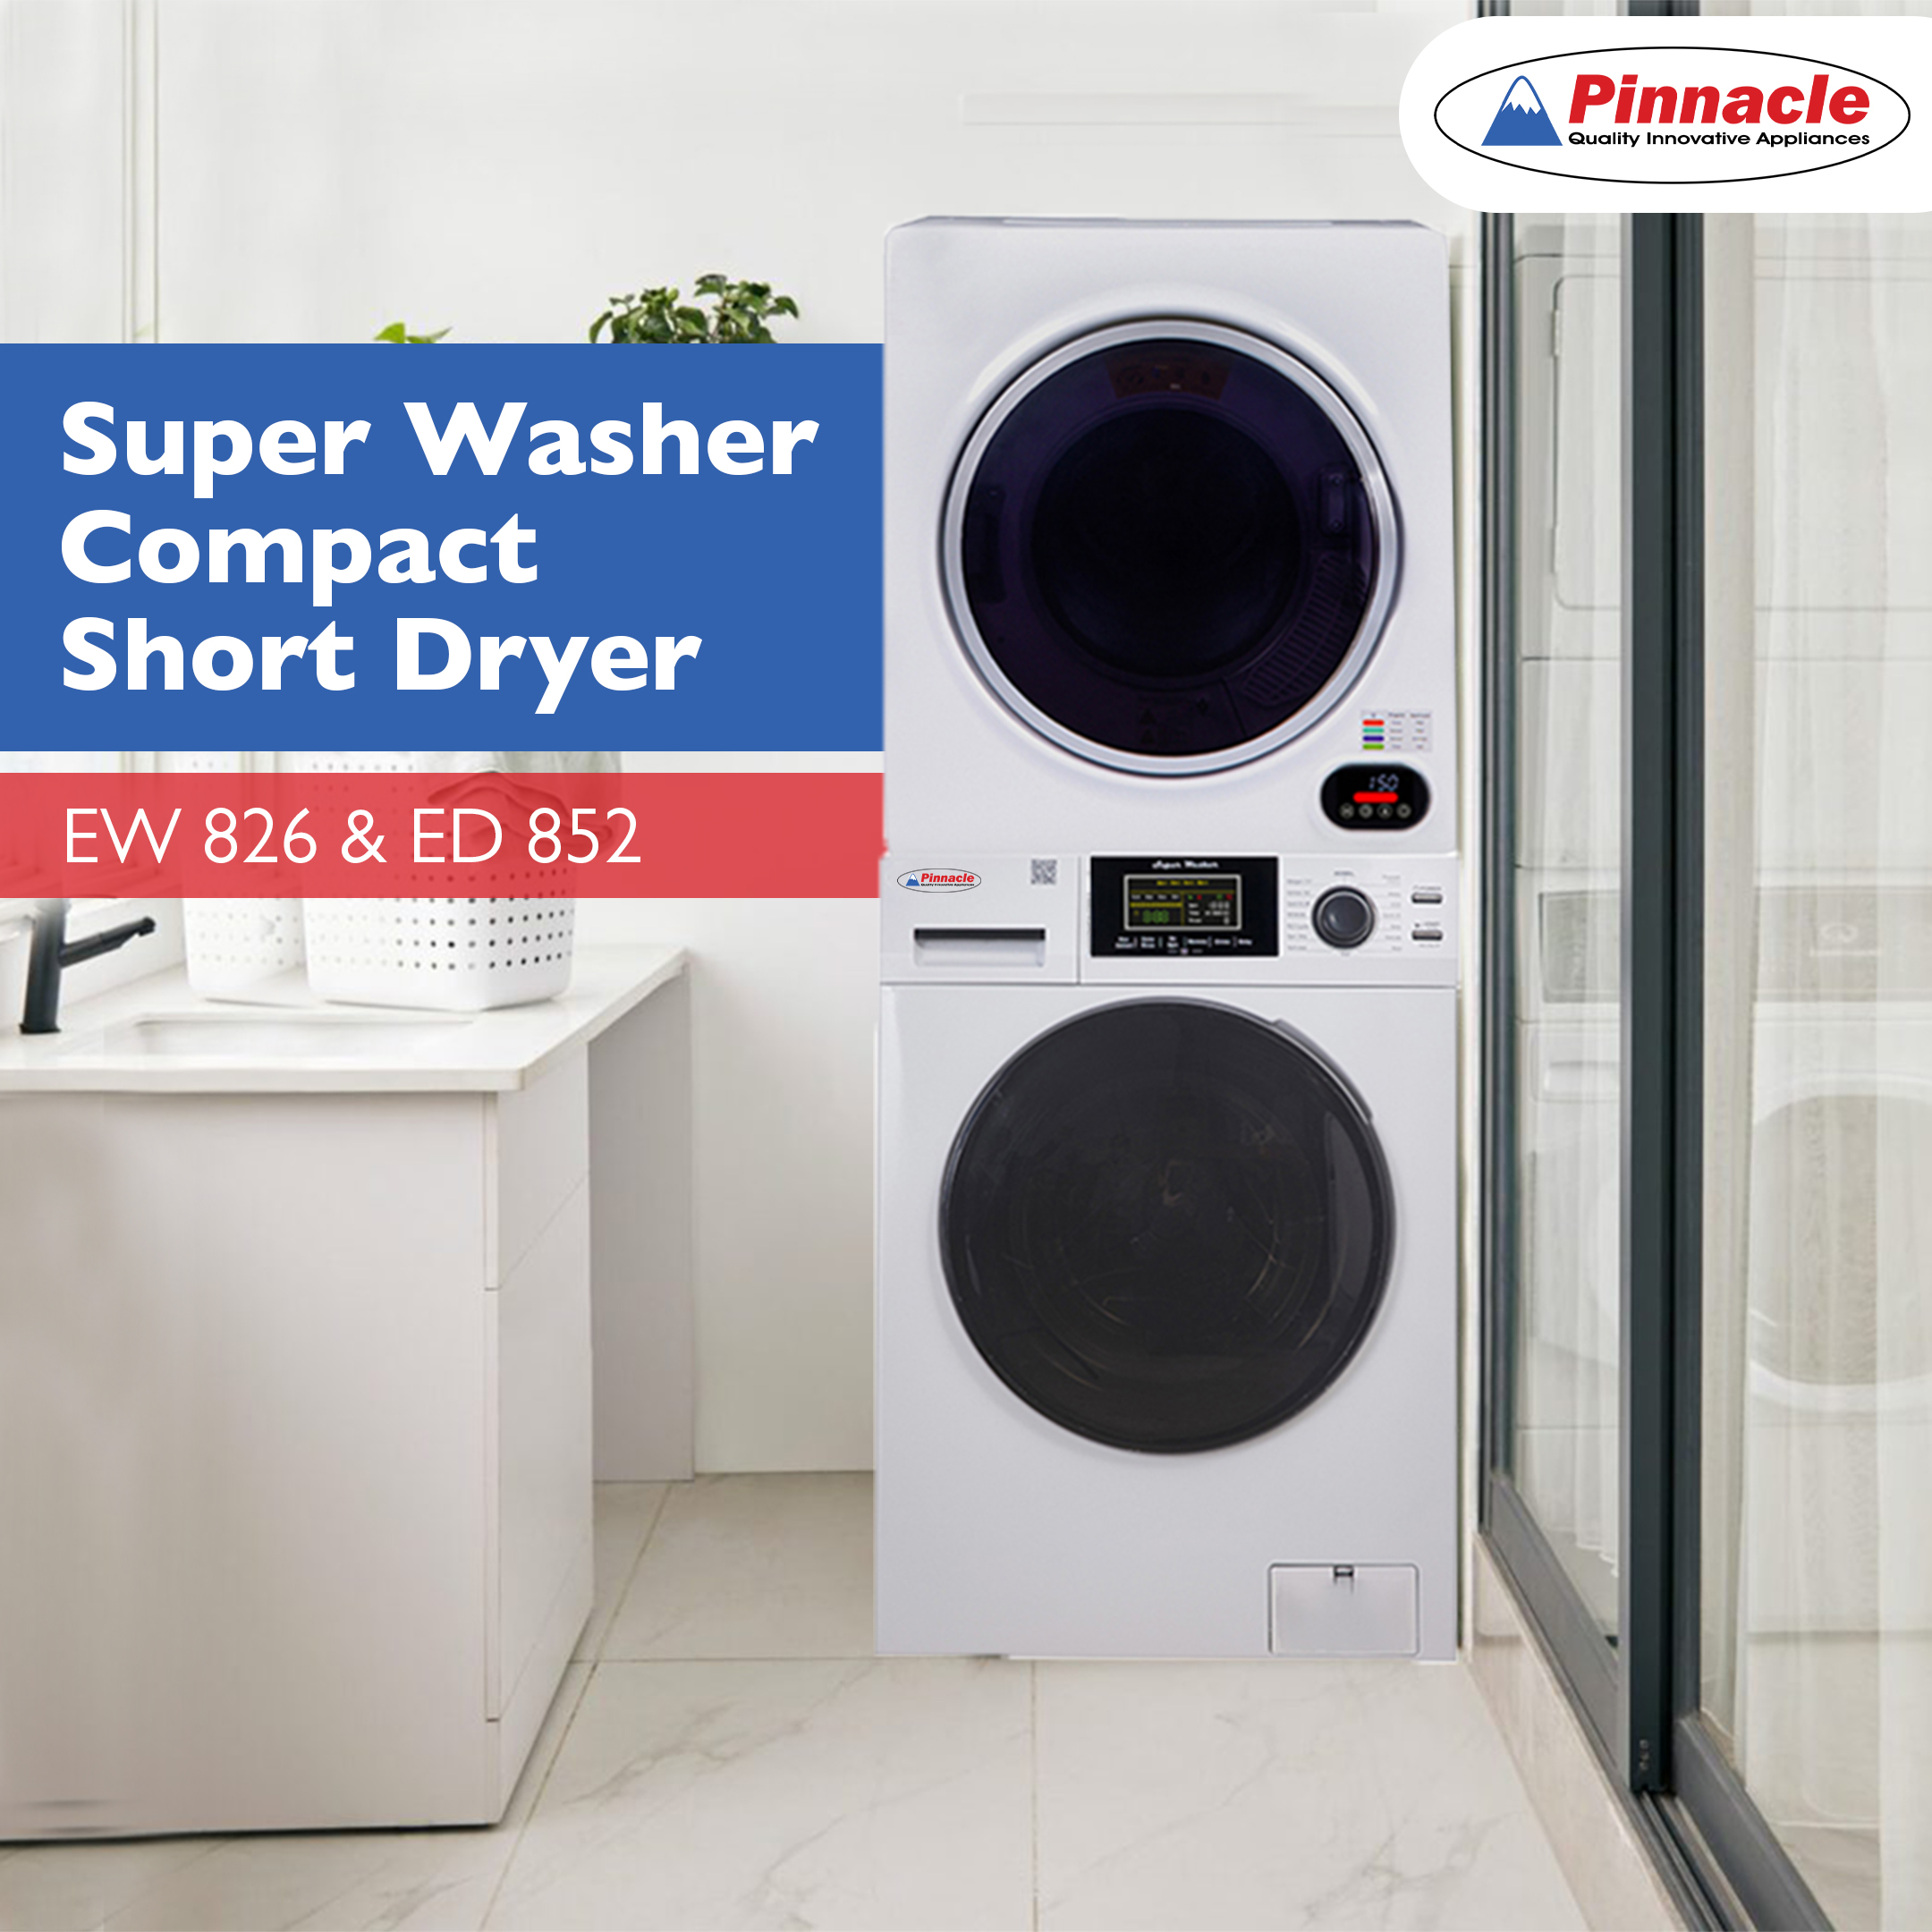 Revolutionize Your Laundry Experience with the Pinnacle Super Washer 3.5 cu. ft. + Compact Short Dryer Stackable Set